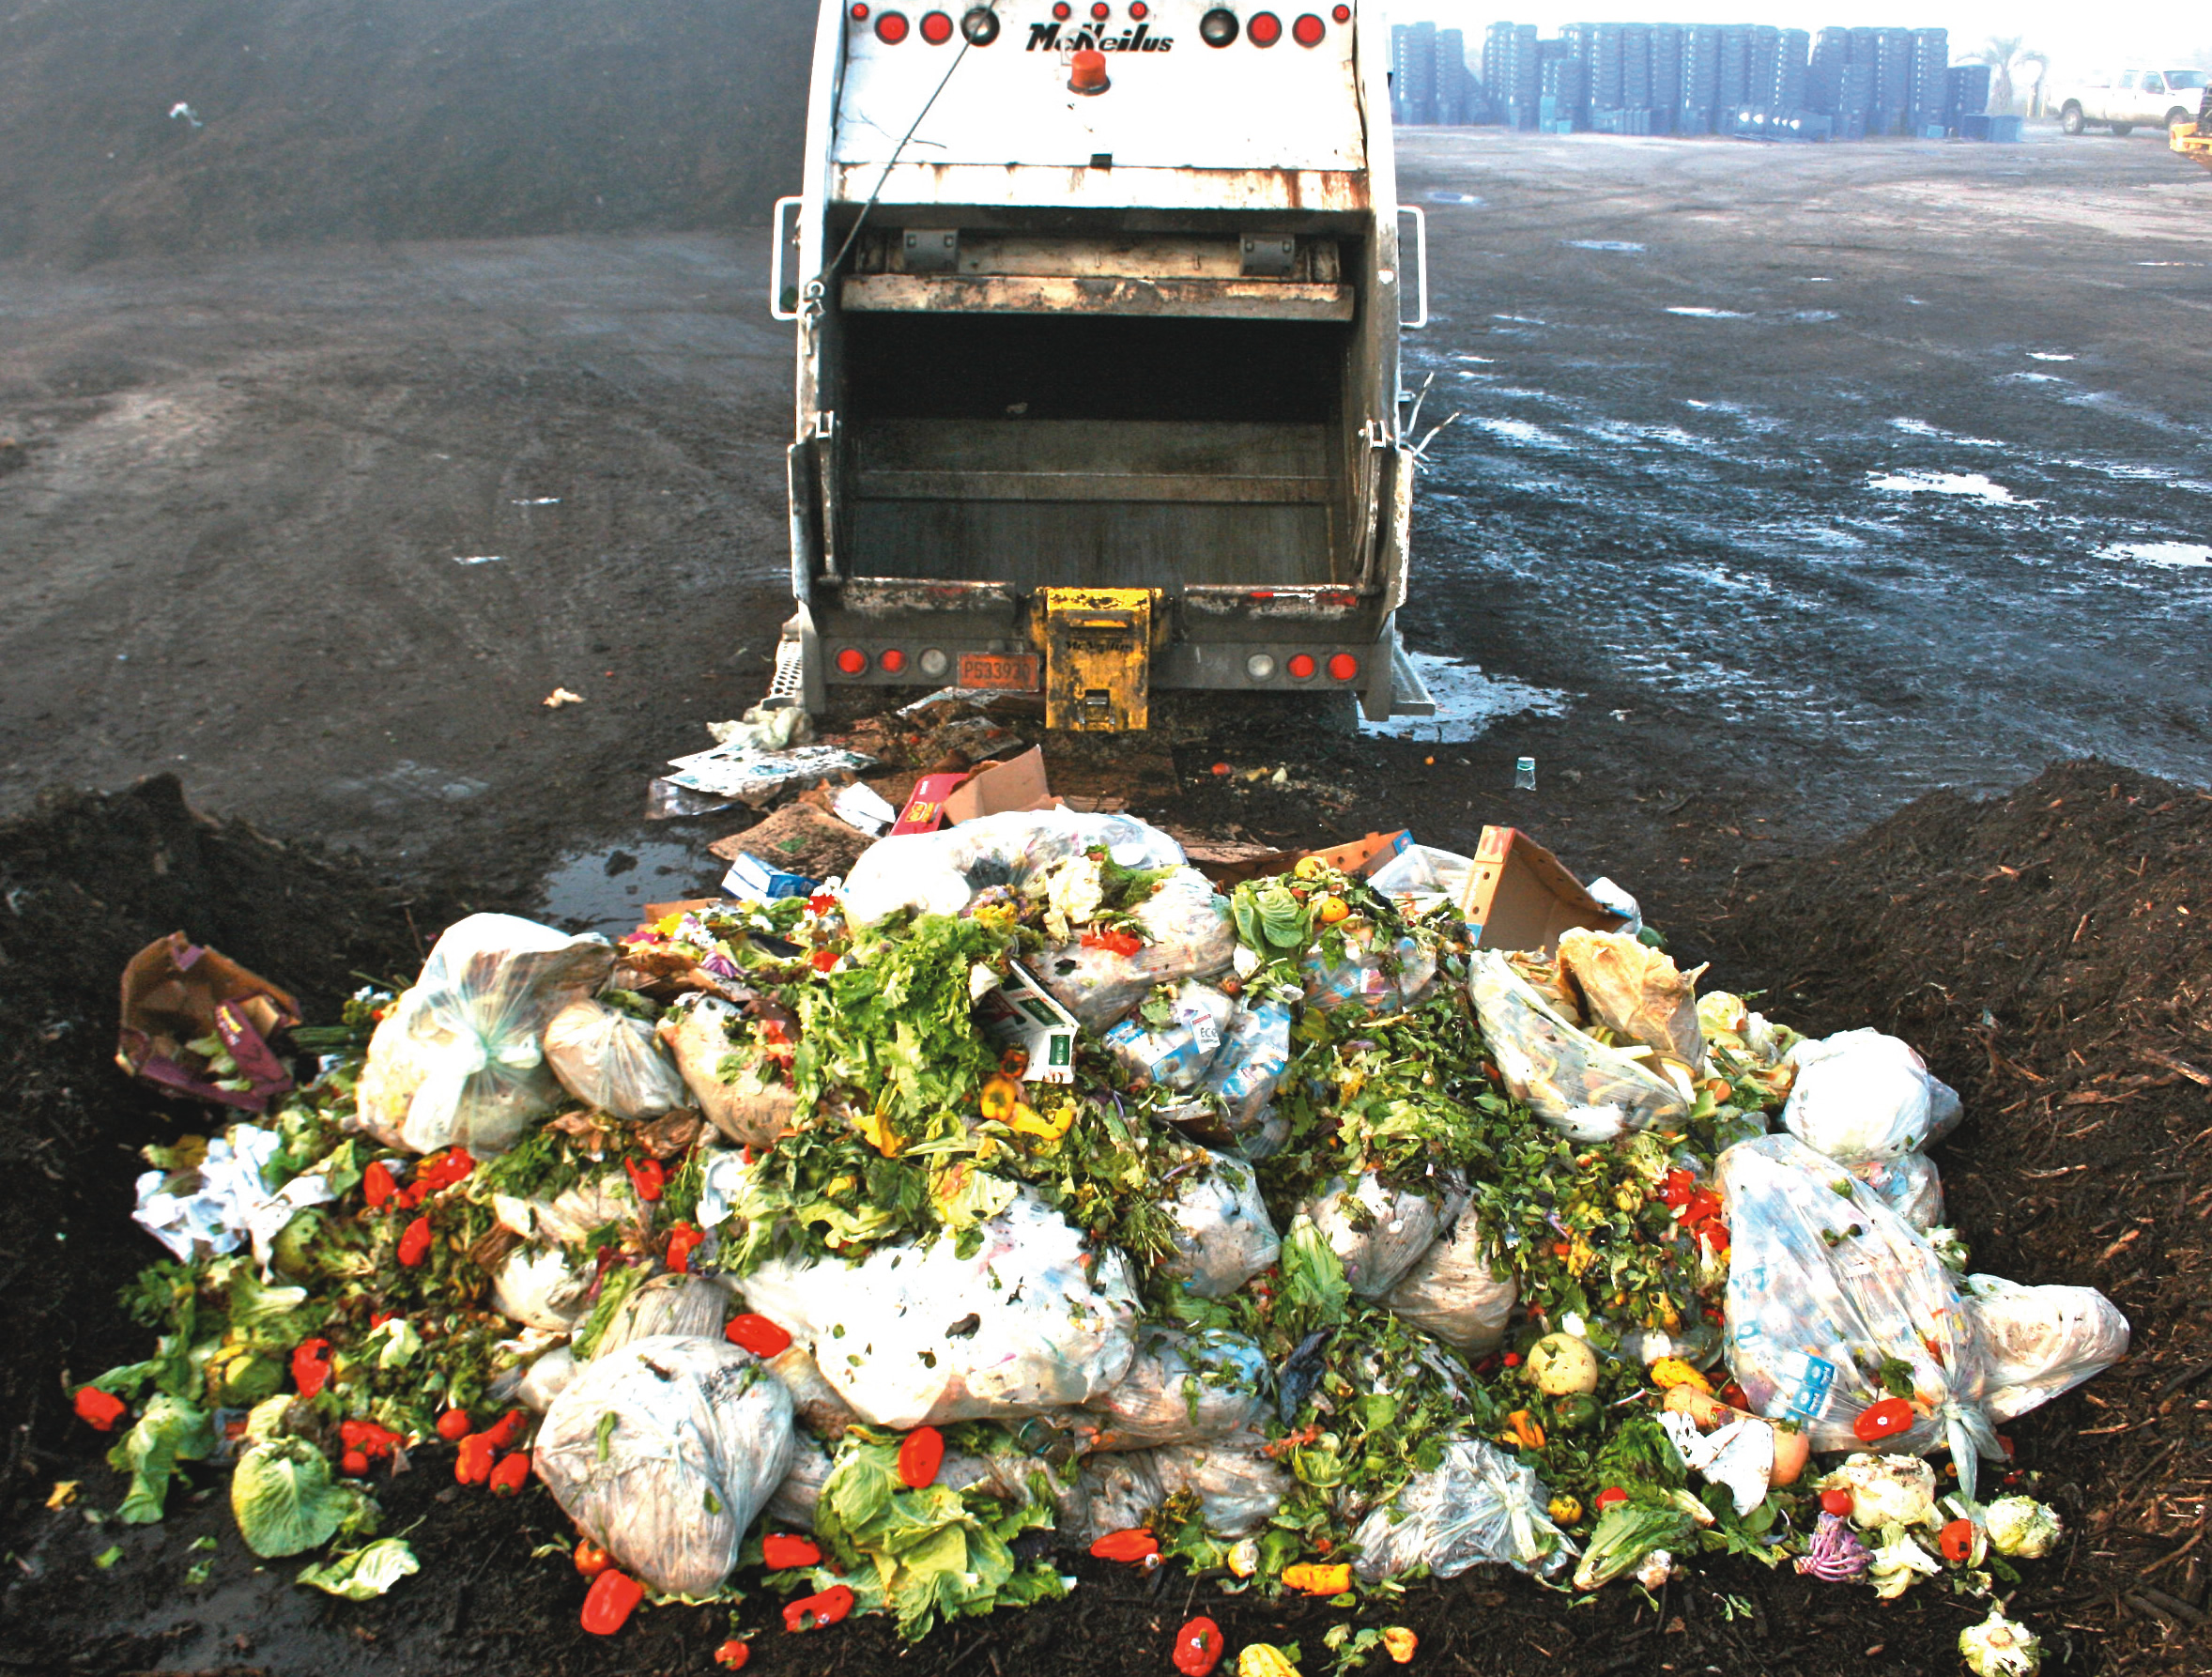 Food Waste Disposal began its dedicated organics collection service in March 2012. Customers are provided 64-gallon totes, and food waste is hauled to the Bee’s Ferry Compost Facility.